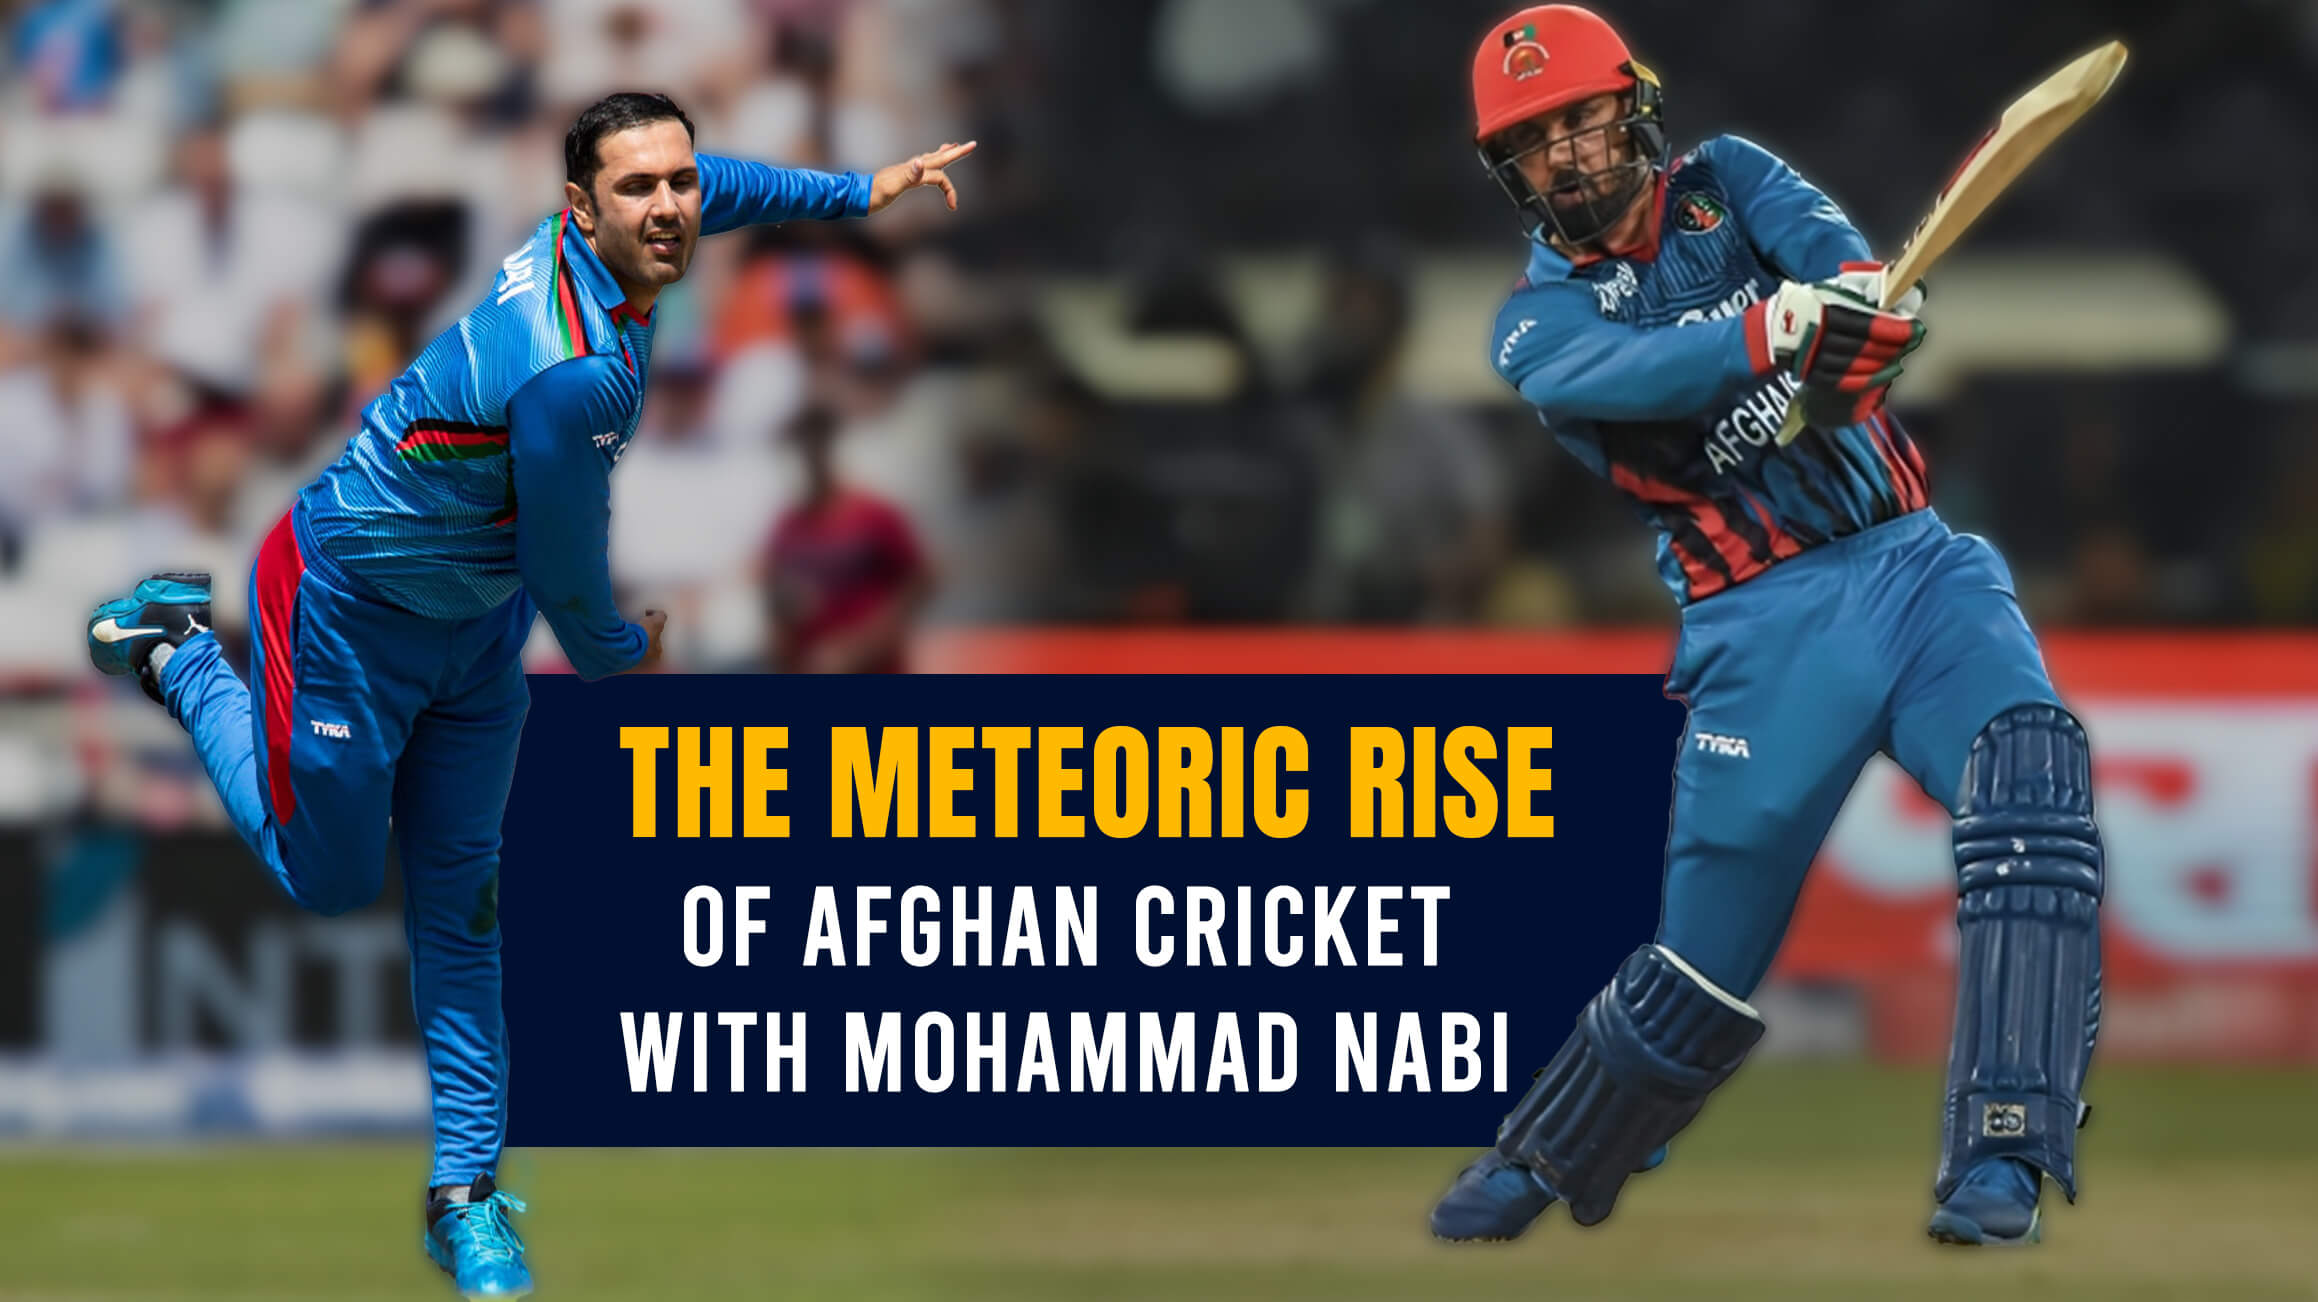 The Meteoric Rise of Afghan Cricket with Mohammad Nabi